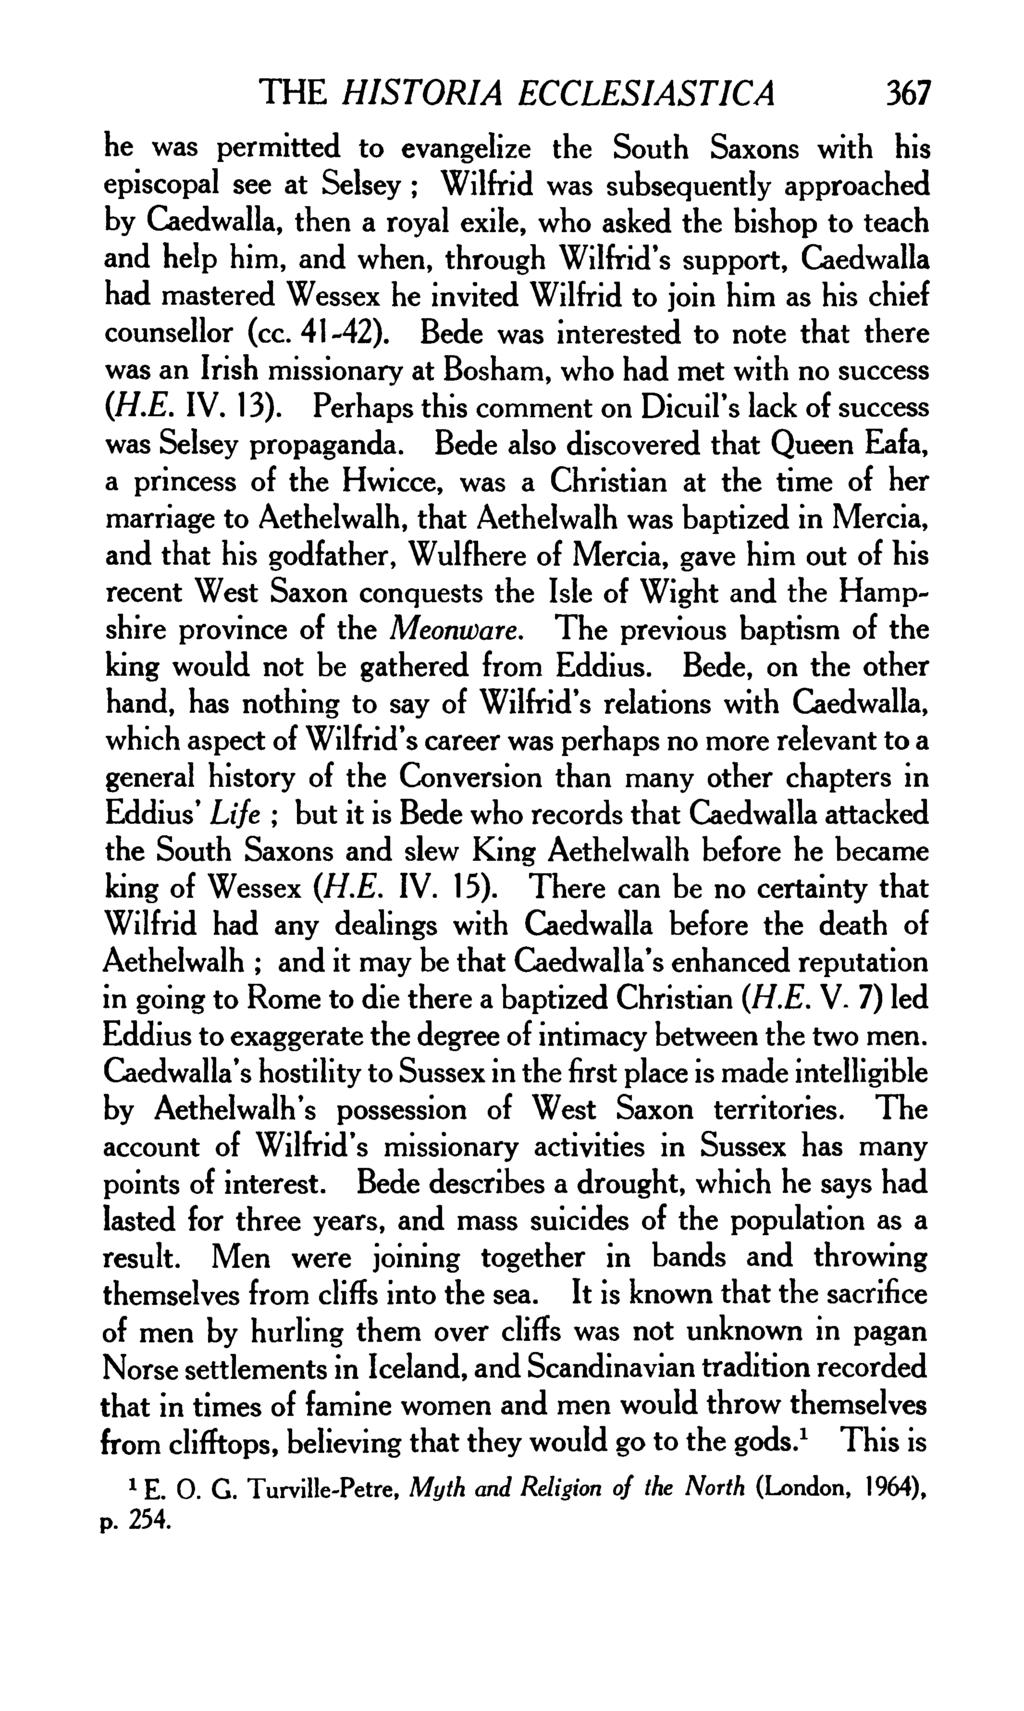 THE HISTORIA ECCLESIASTICA 367 he was permitted to evangelize the South Saxons with his episcopal see at Selsey ; Wilfrid was subsequently approached by Caedwalla, then a royal exile, who asked the